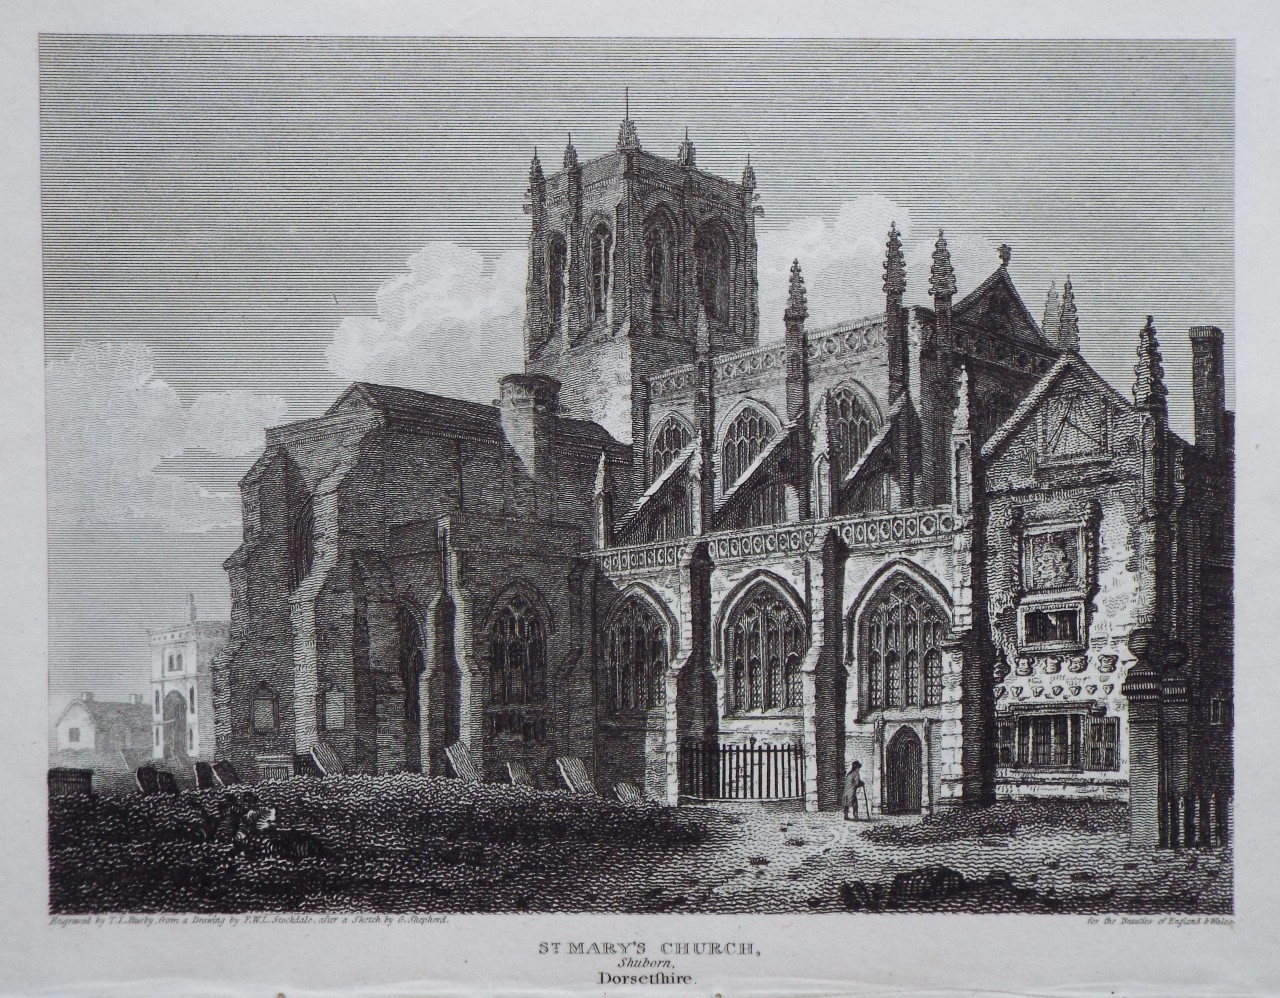 Print - St. Mary's Church, Sherborn, Dorsetshire. - Busby